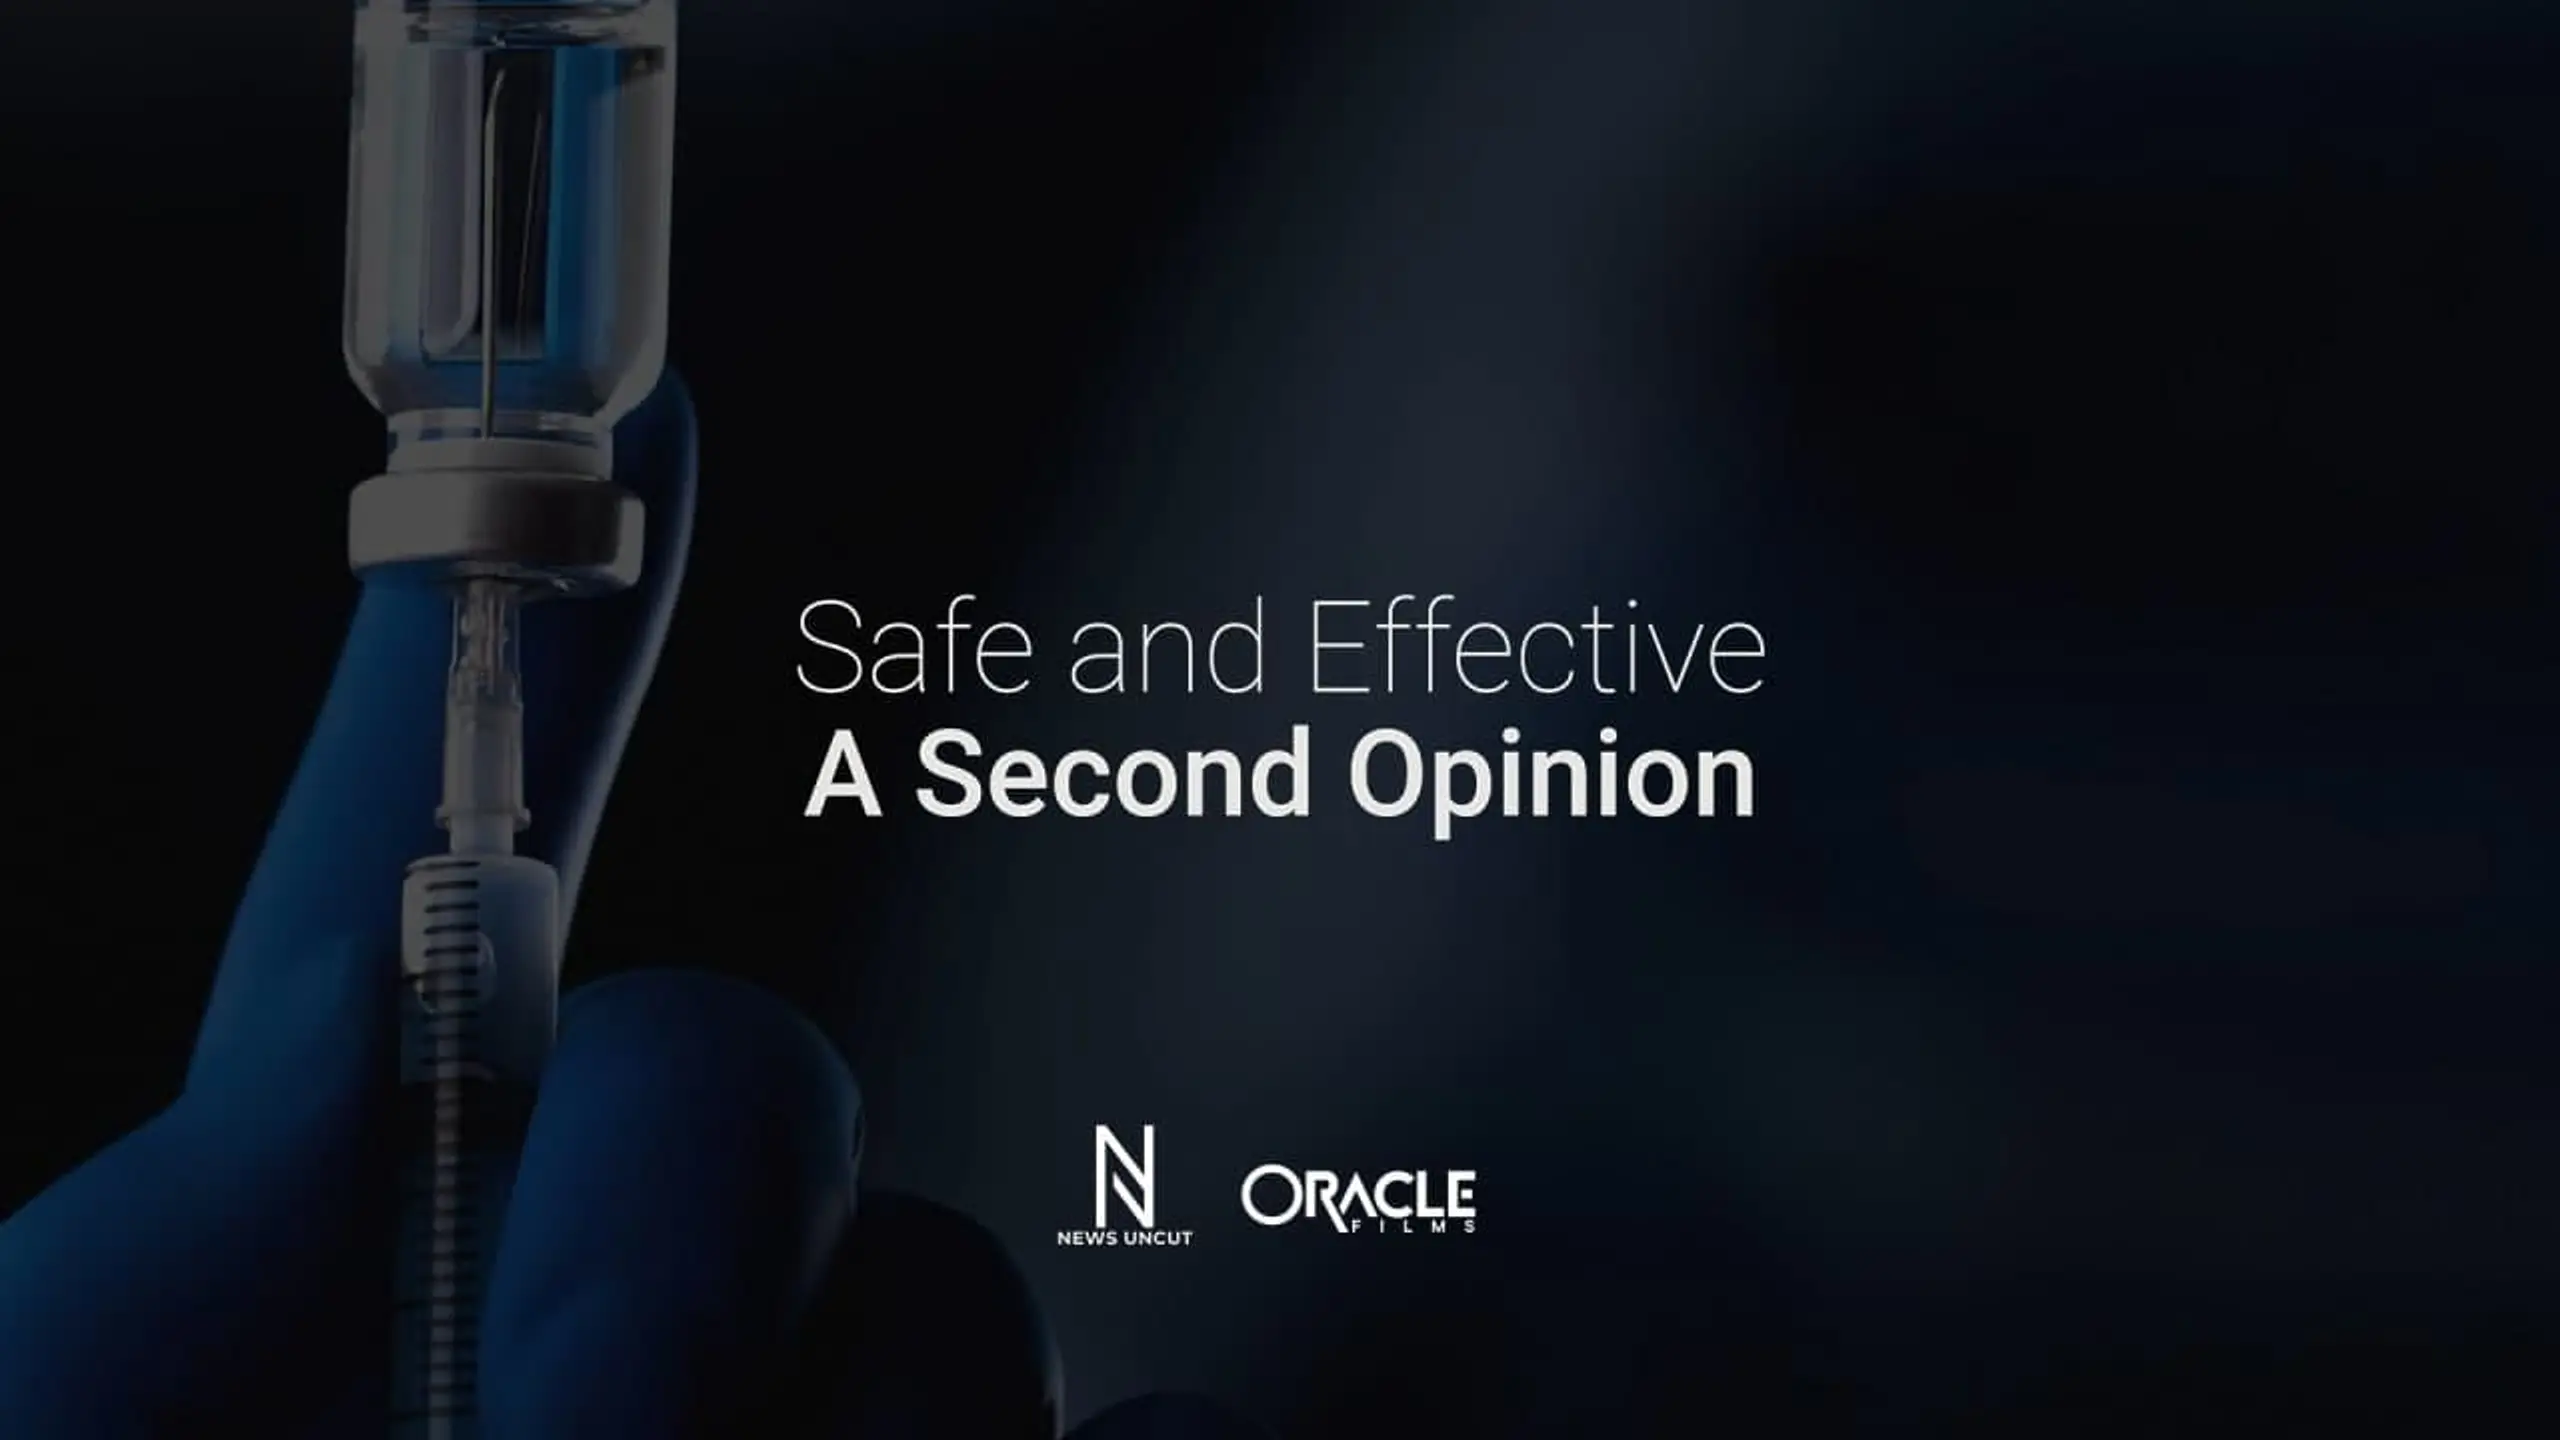 Safe and Effective: A Second Opinion